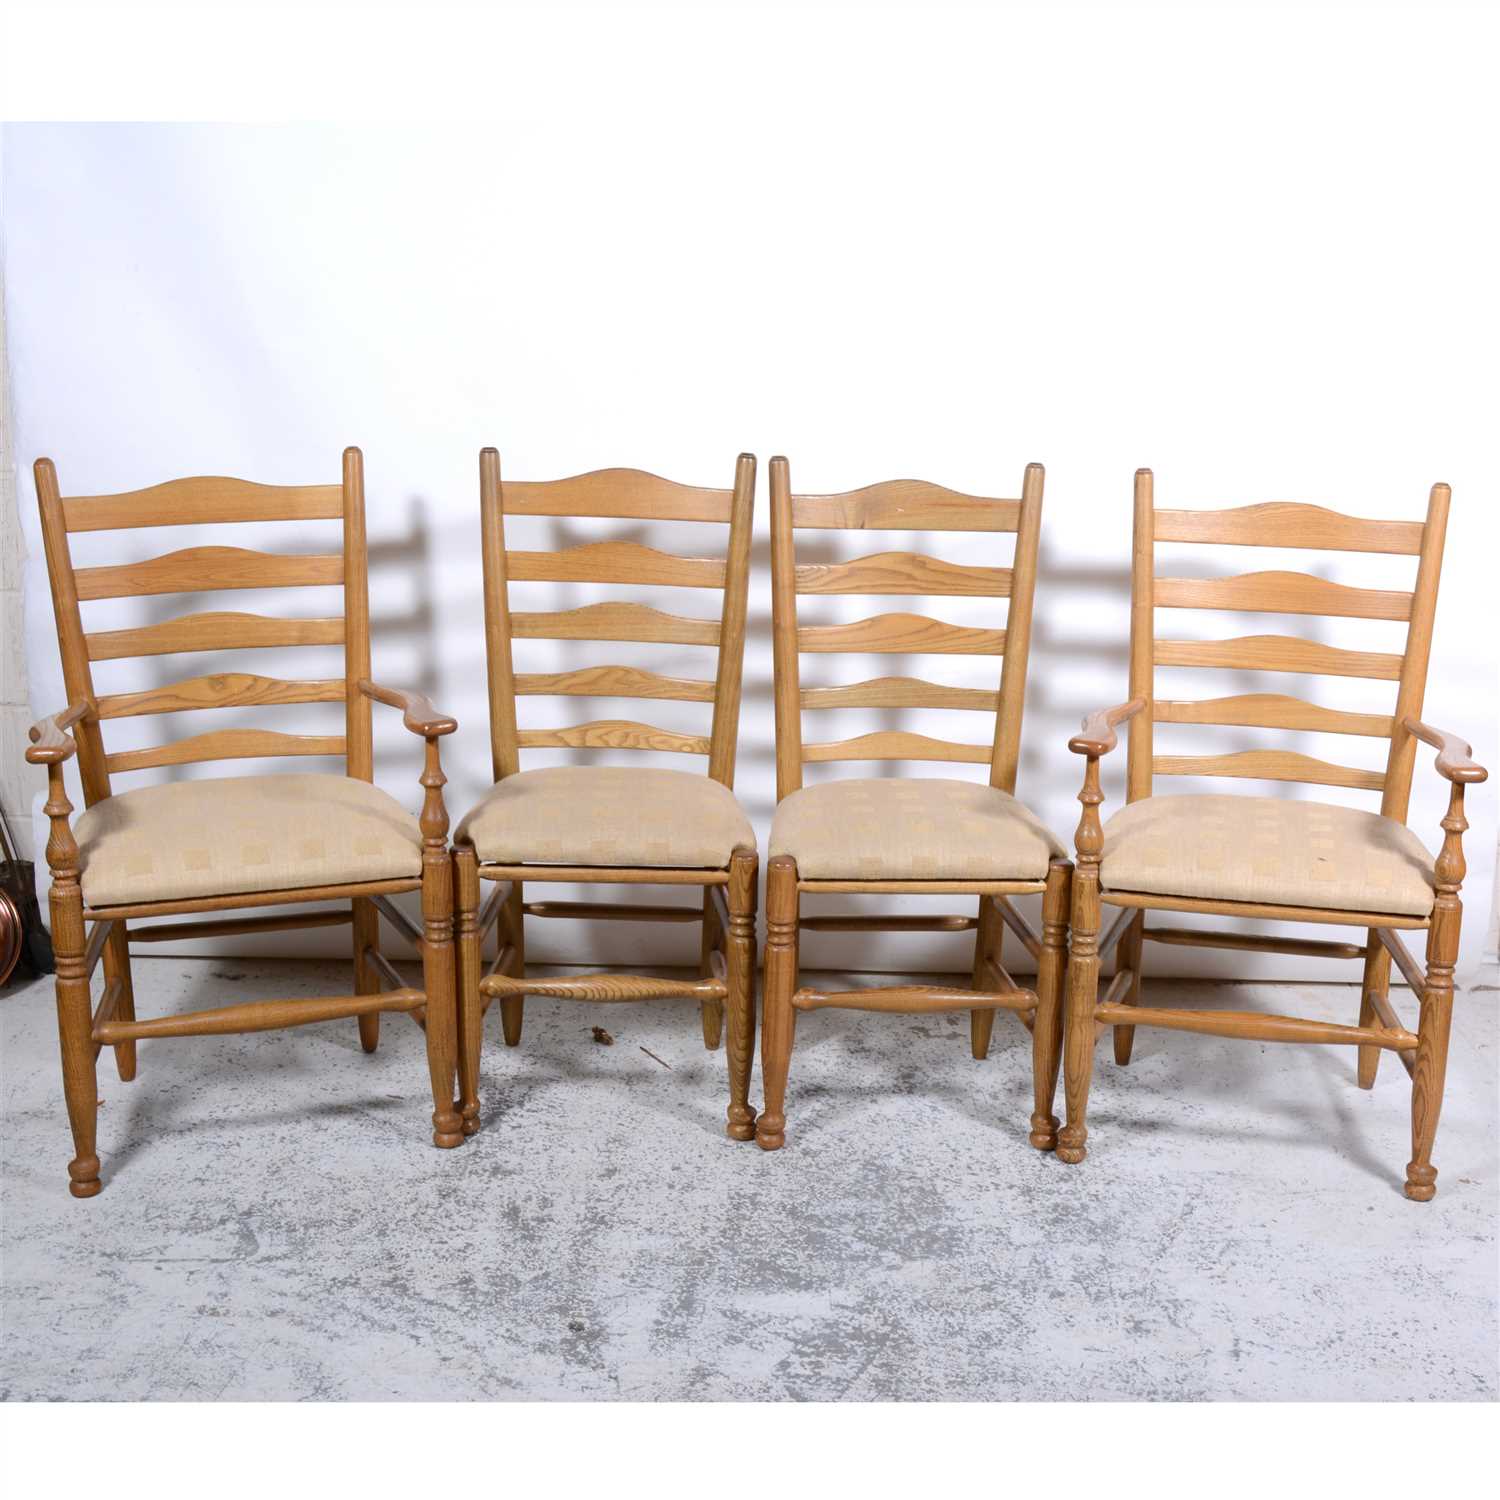 Lot 477 - Set of six elm and ash ladder-back dining chairs, comprising two elbow chairs, four single chairs, all with turned legs and rails, the elbow chairs 60cm, with a set of upholstered and cane drop-in....